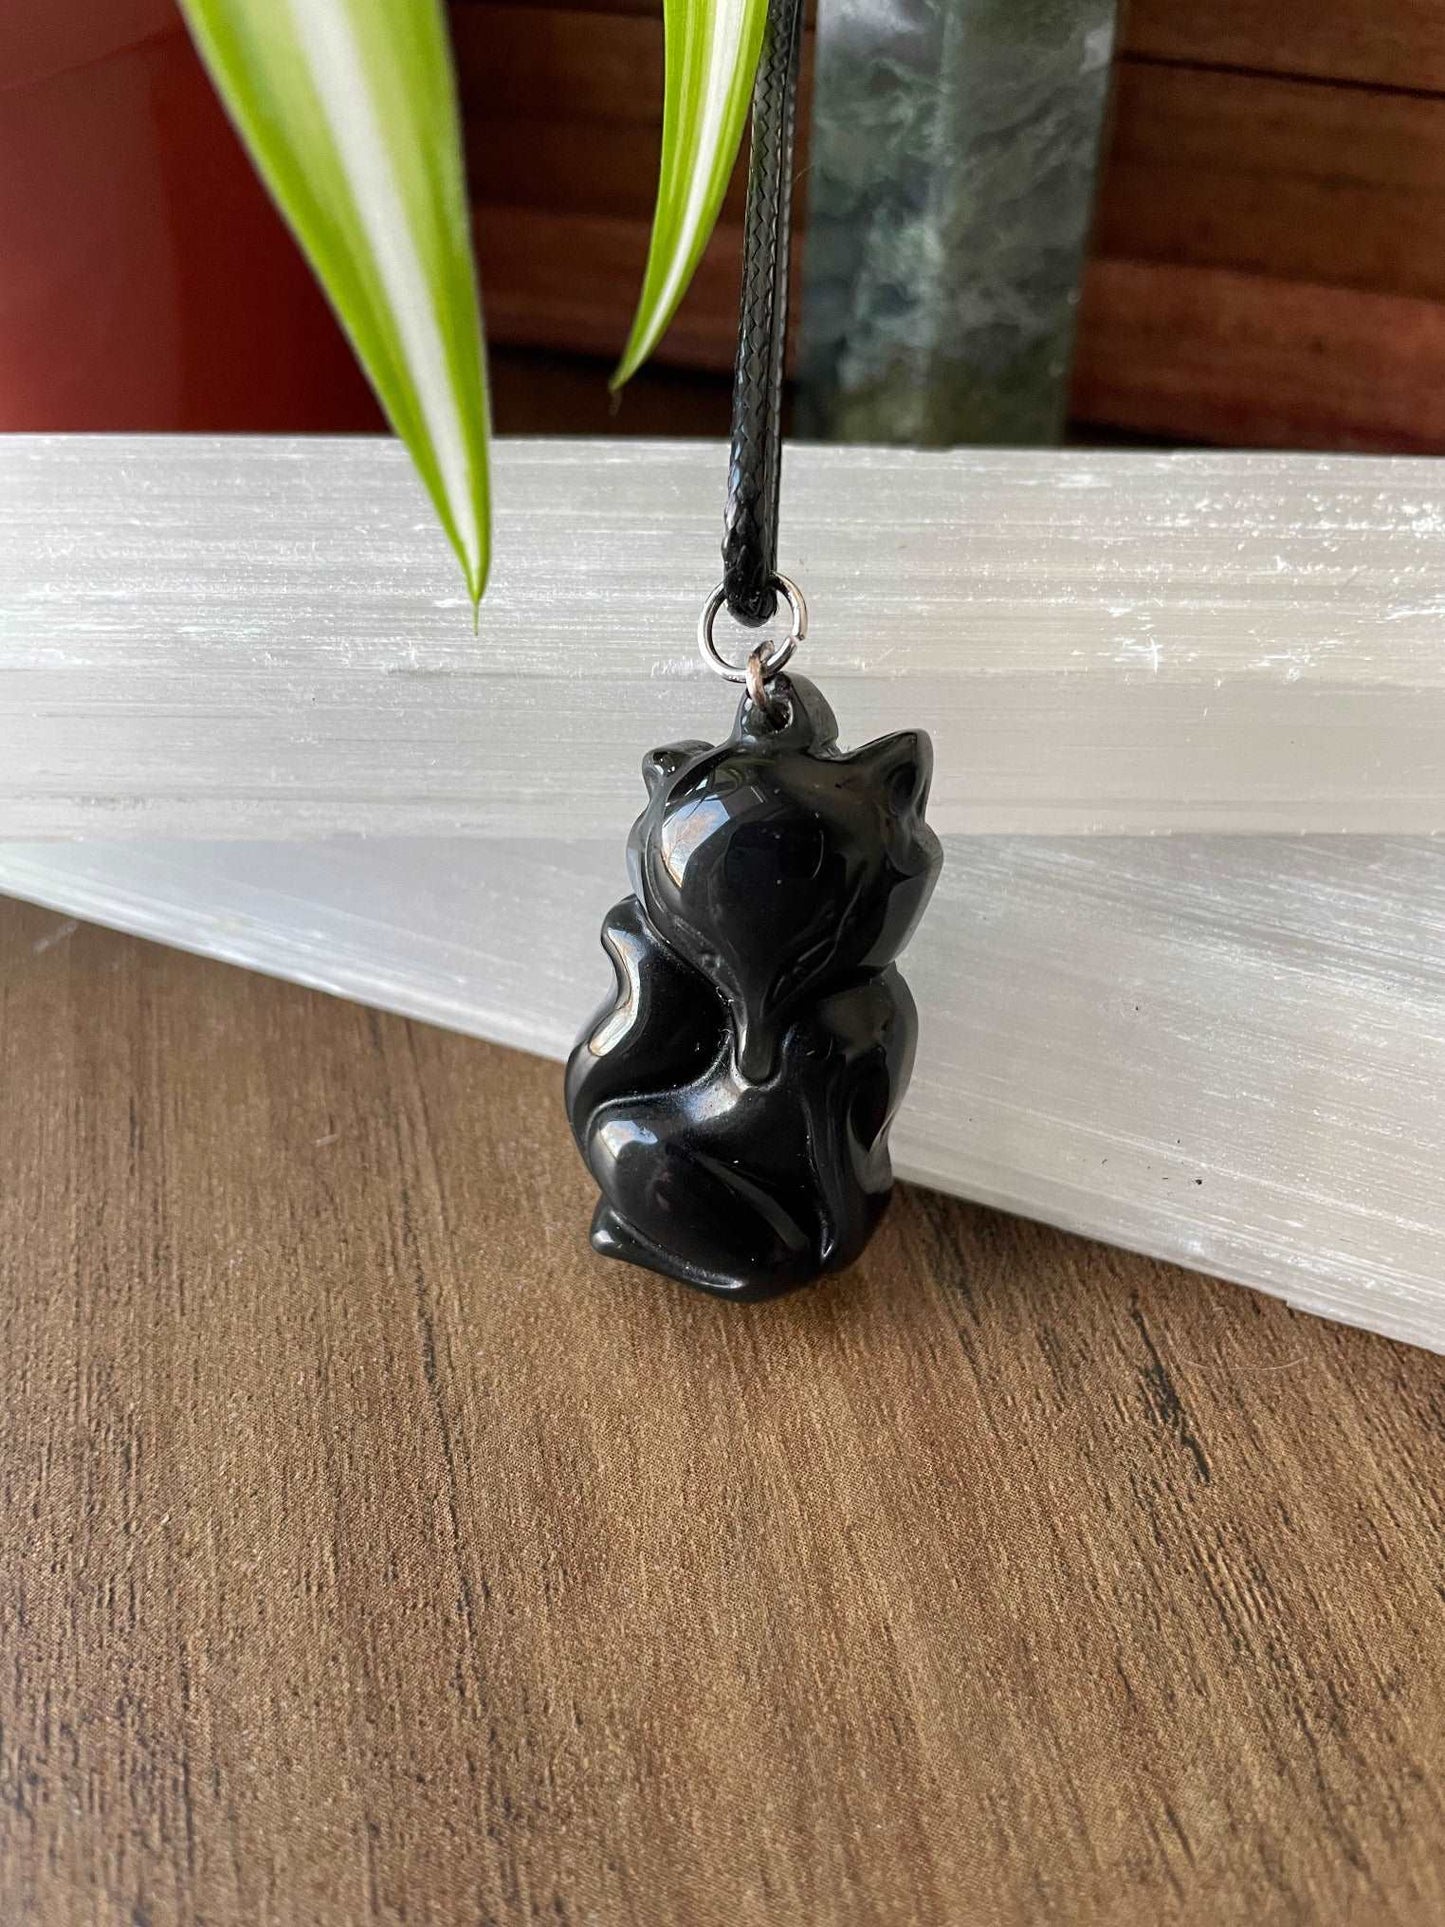 Pictured is a necklace pendant of a fox carved out of black obsidian.